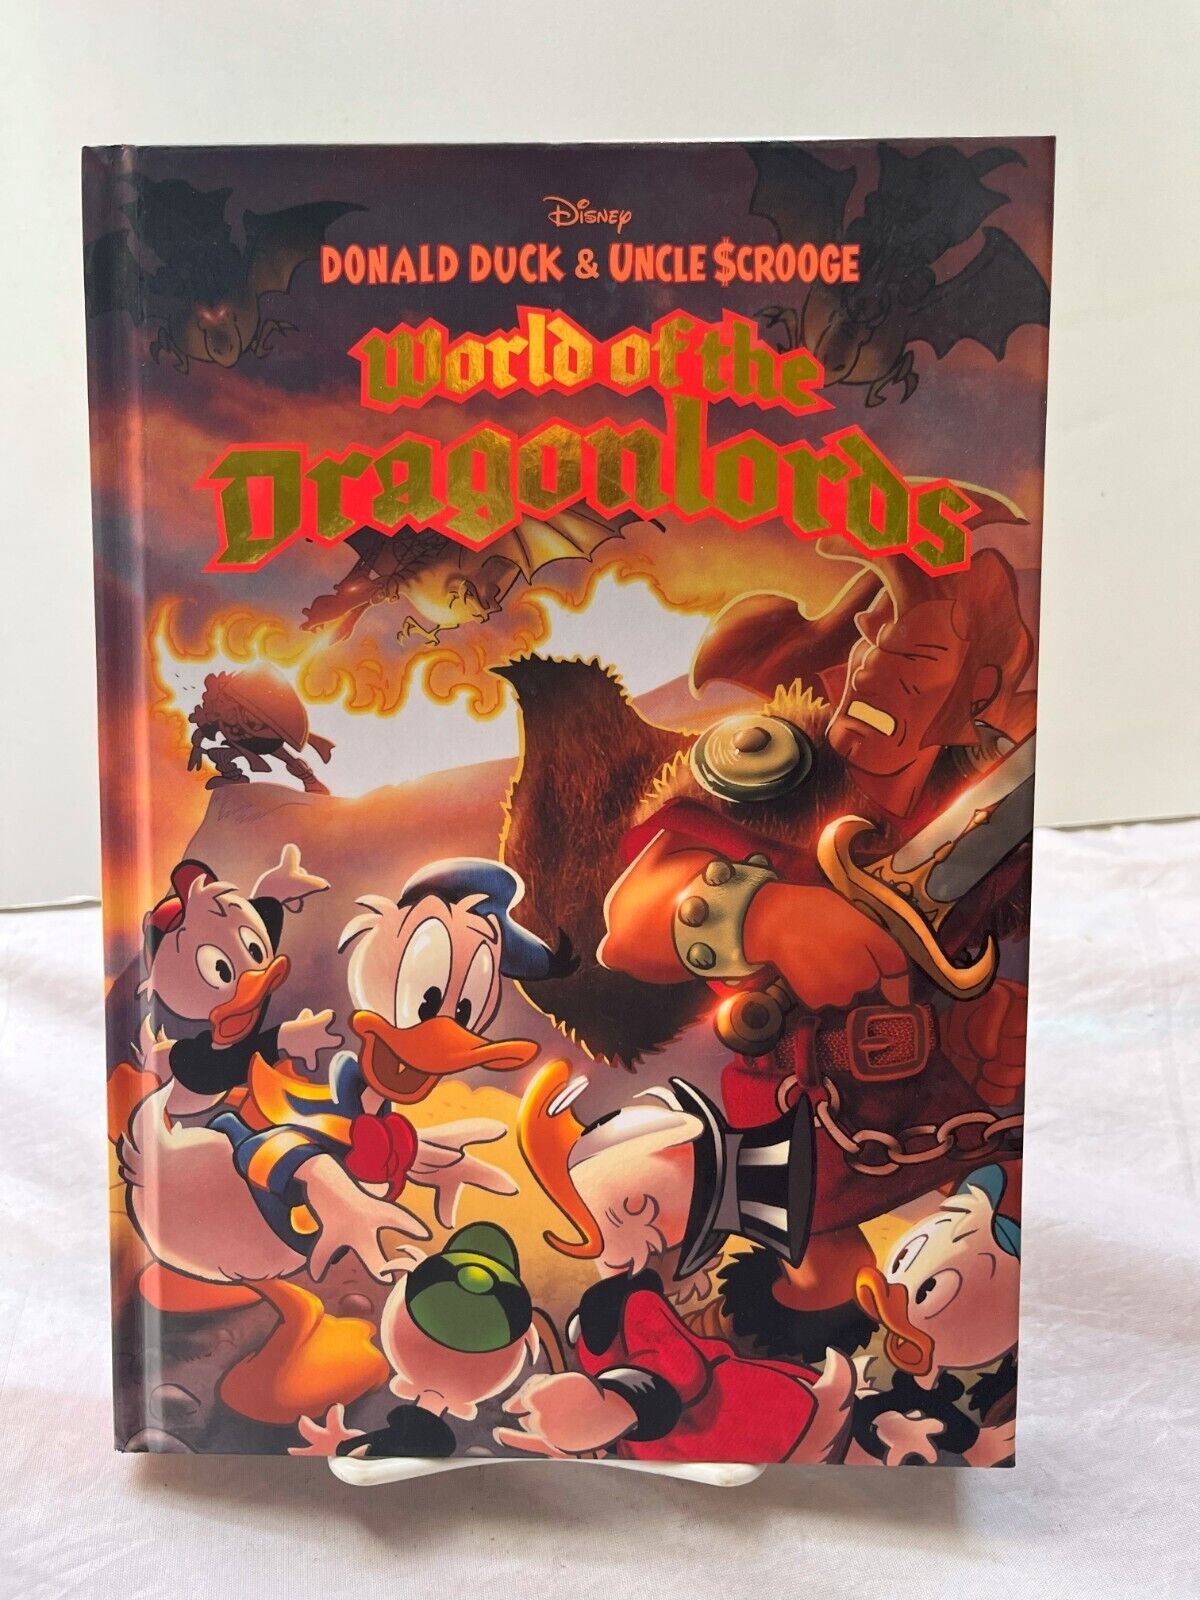 Donald Duck and Uncle Scrooge: World of the Dragonlords Erickson & Cavazzano